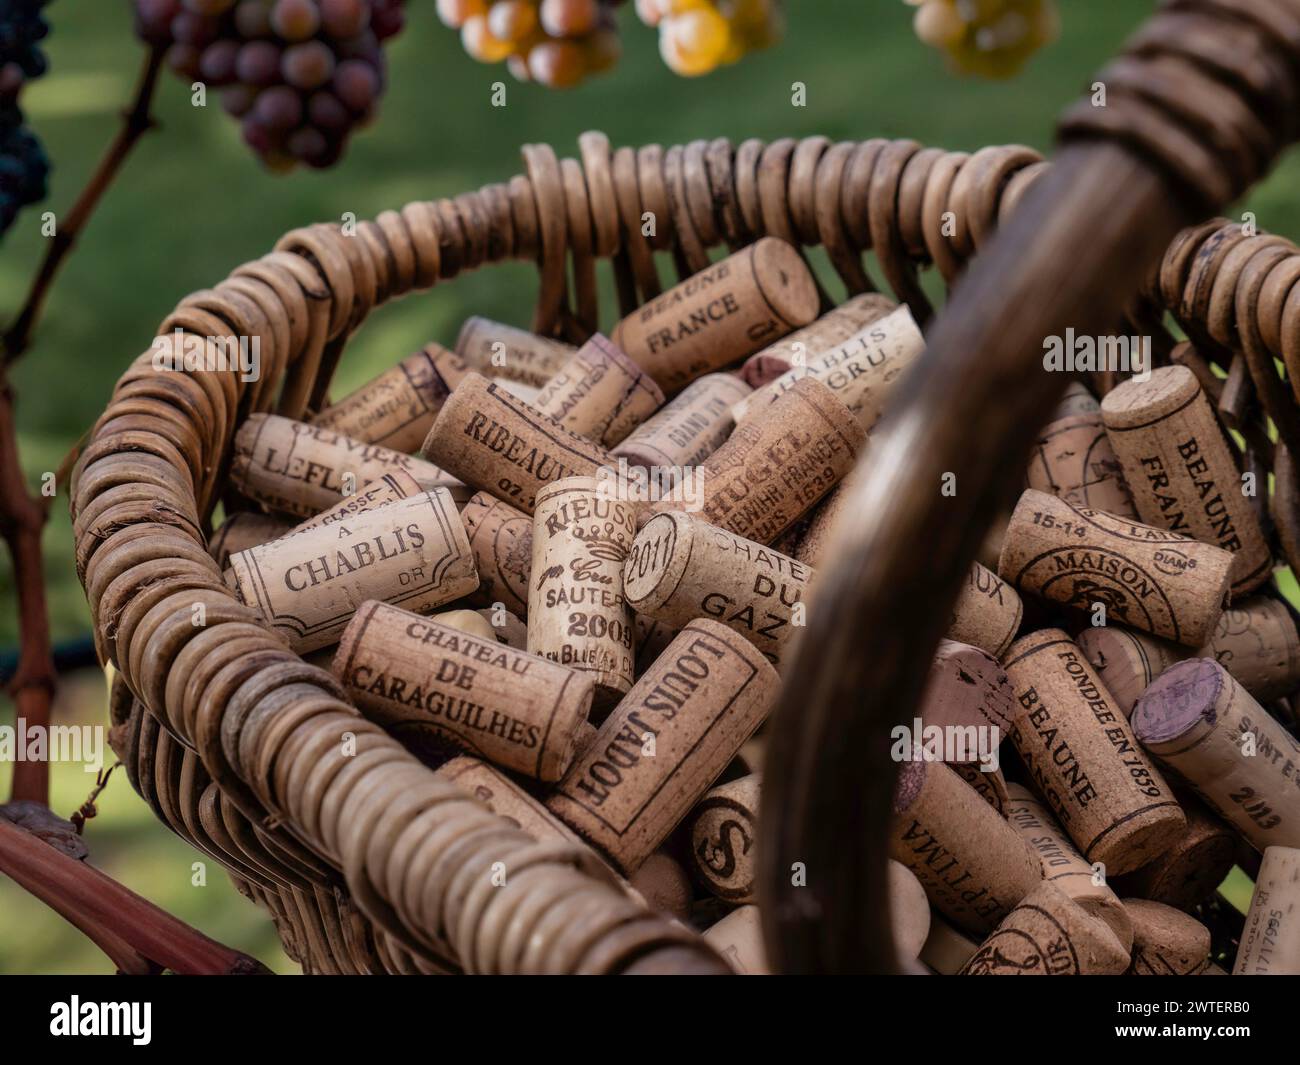 WINE CORKS HARVEST FRANCE Concept image of French grape pickers harvest basket with quality selection of regional French luxury wine corks, with red and white grapes behind. French quality wine production industry Stock Photo